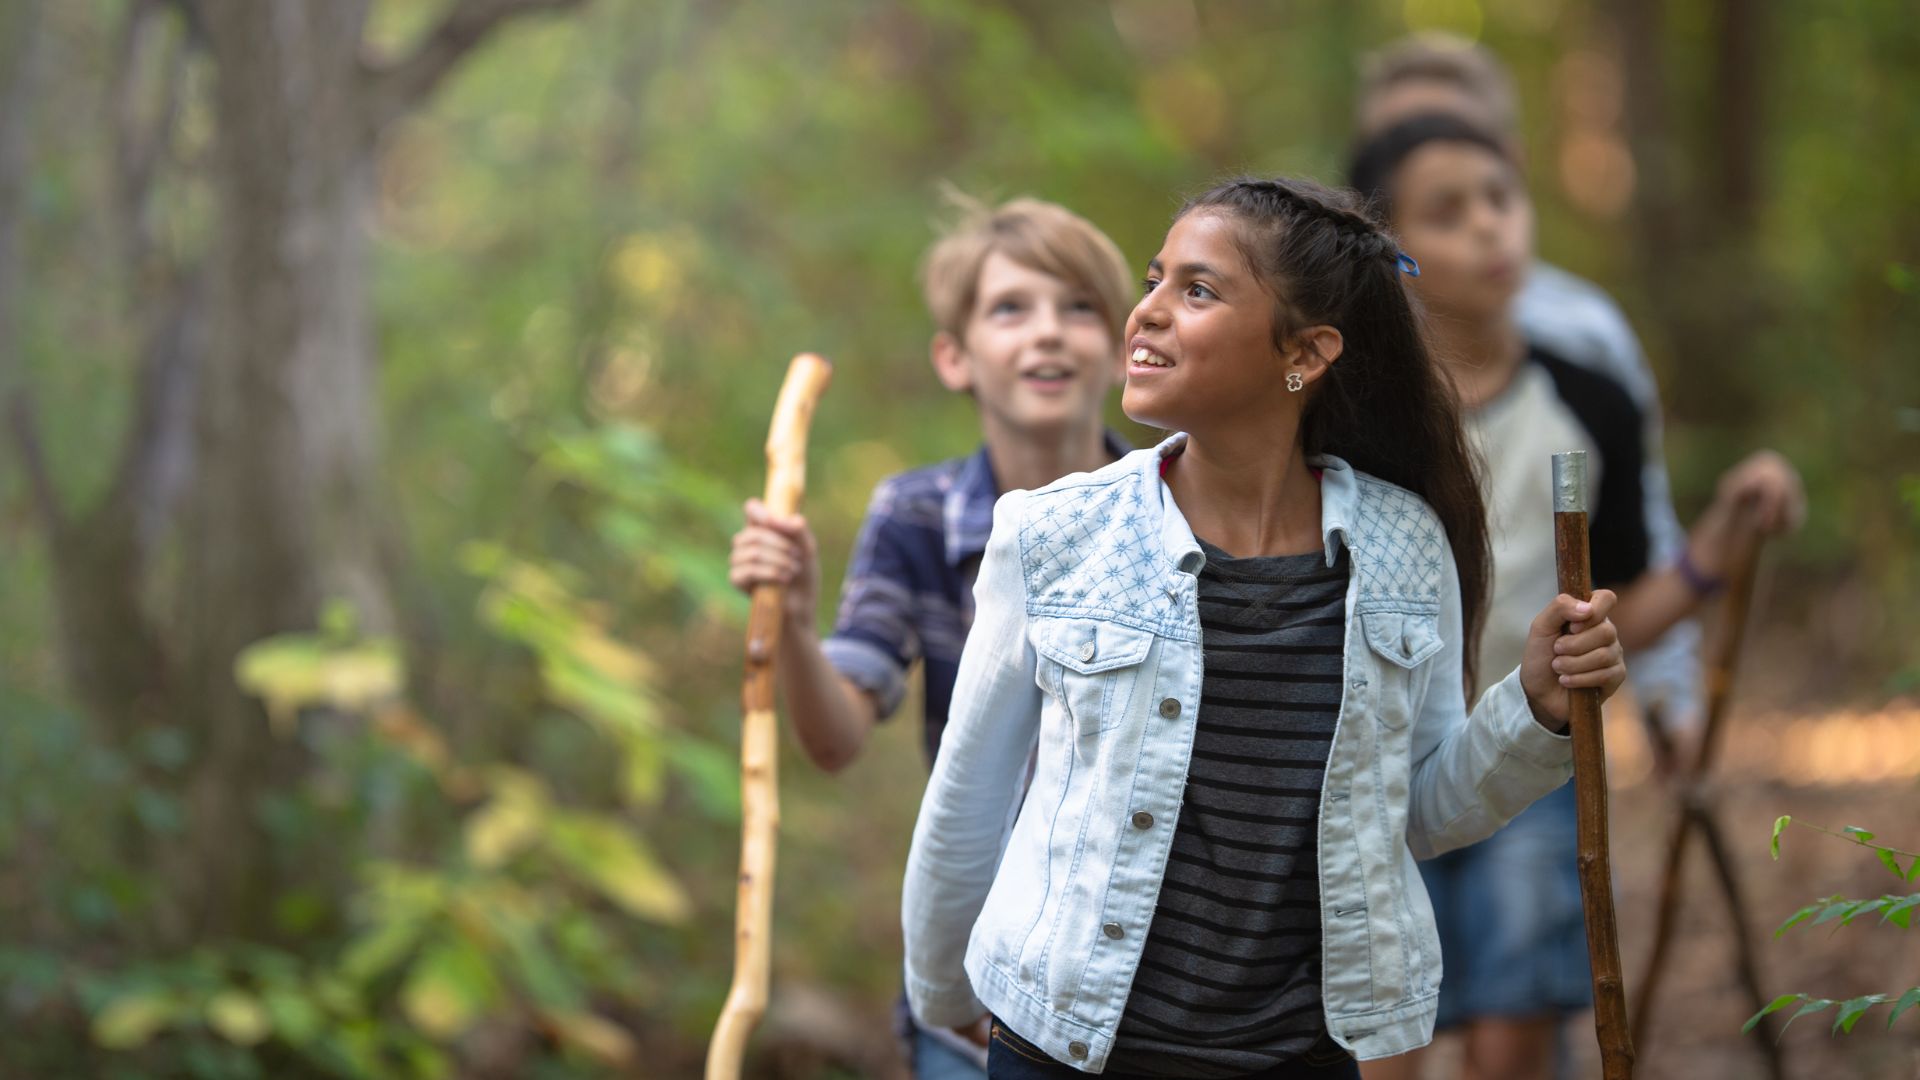 a group of young students walks through a forest using walking sticks